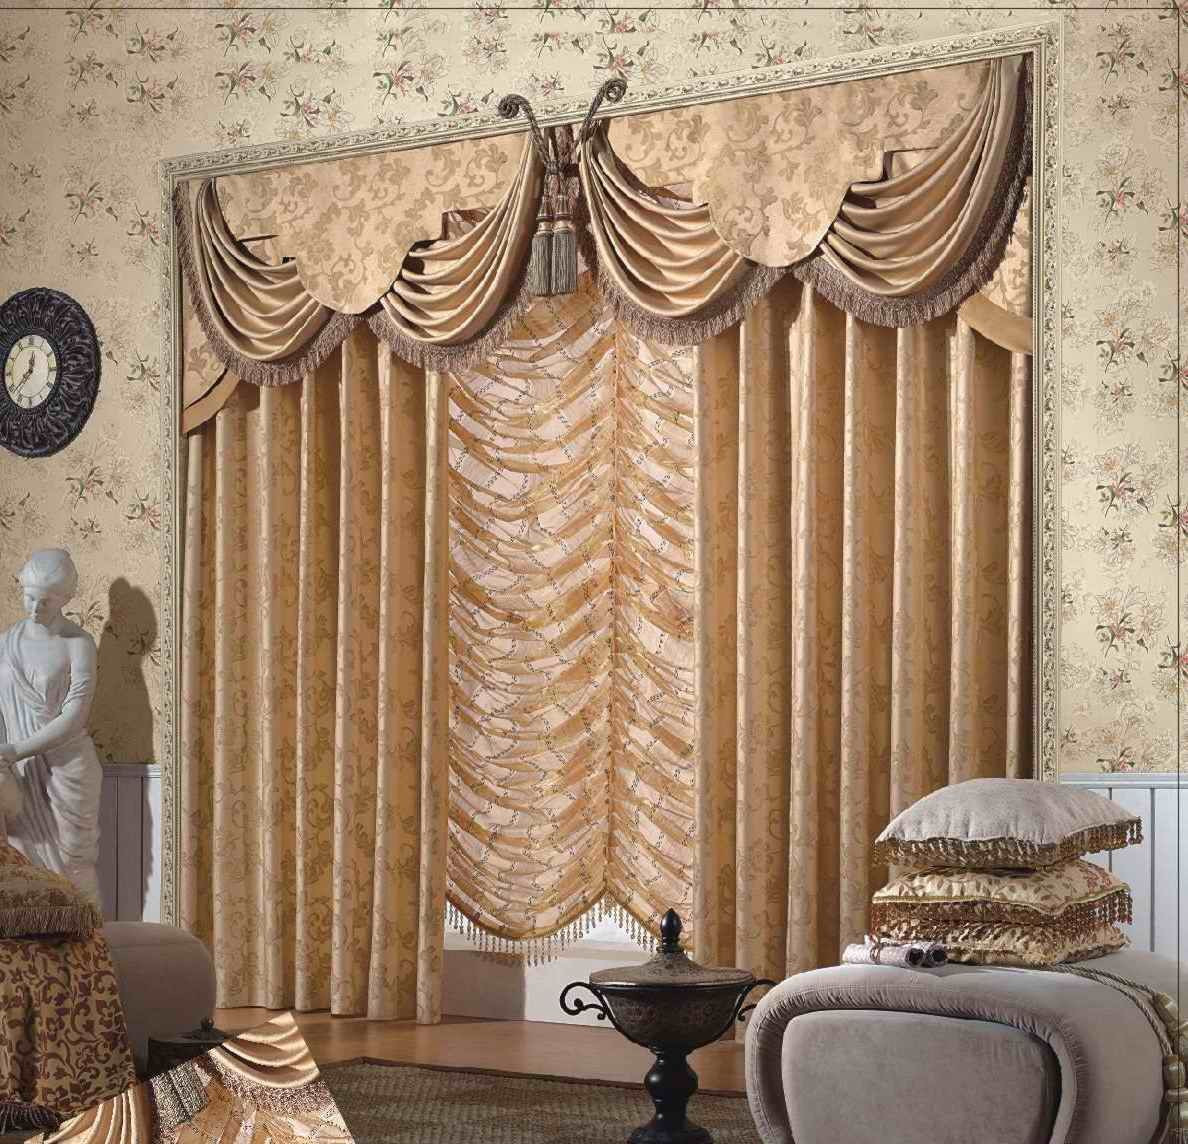 Fancy Curtains For Living Room
 Elegant Curtains For The Living Room – Modern House